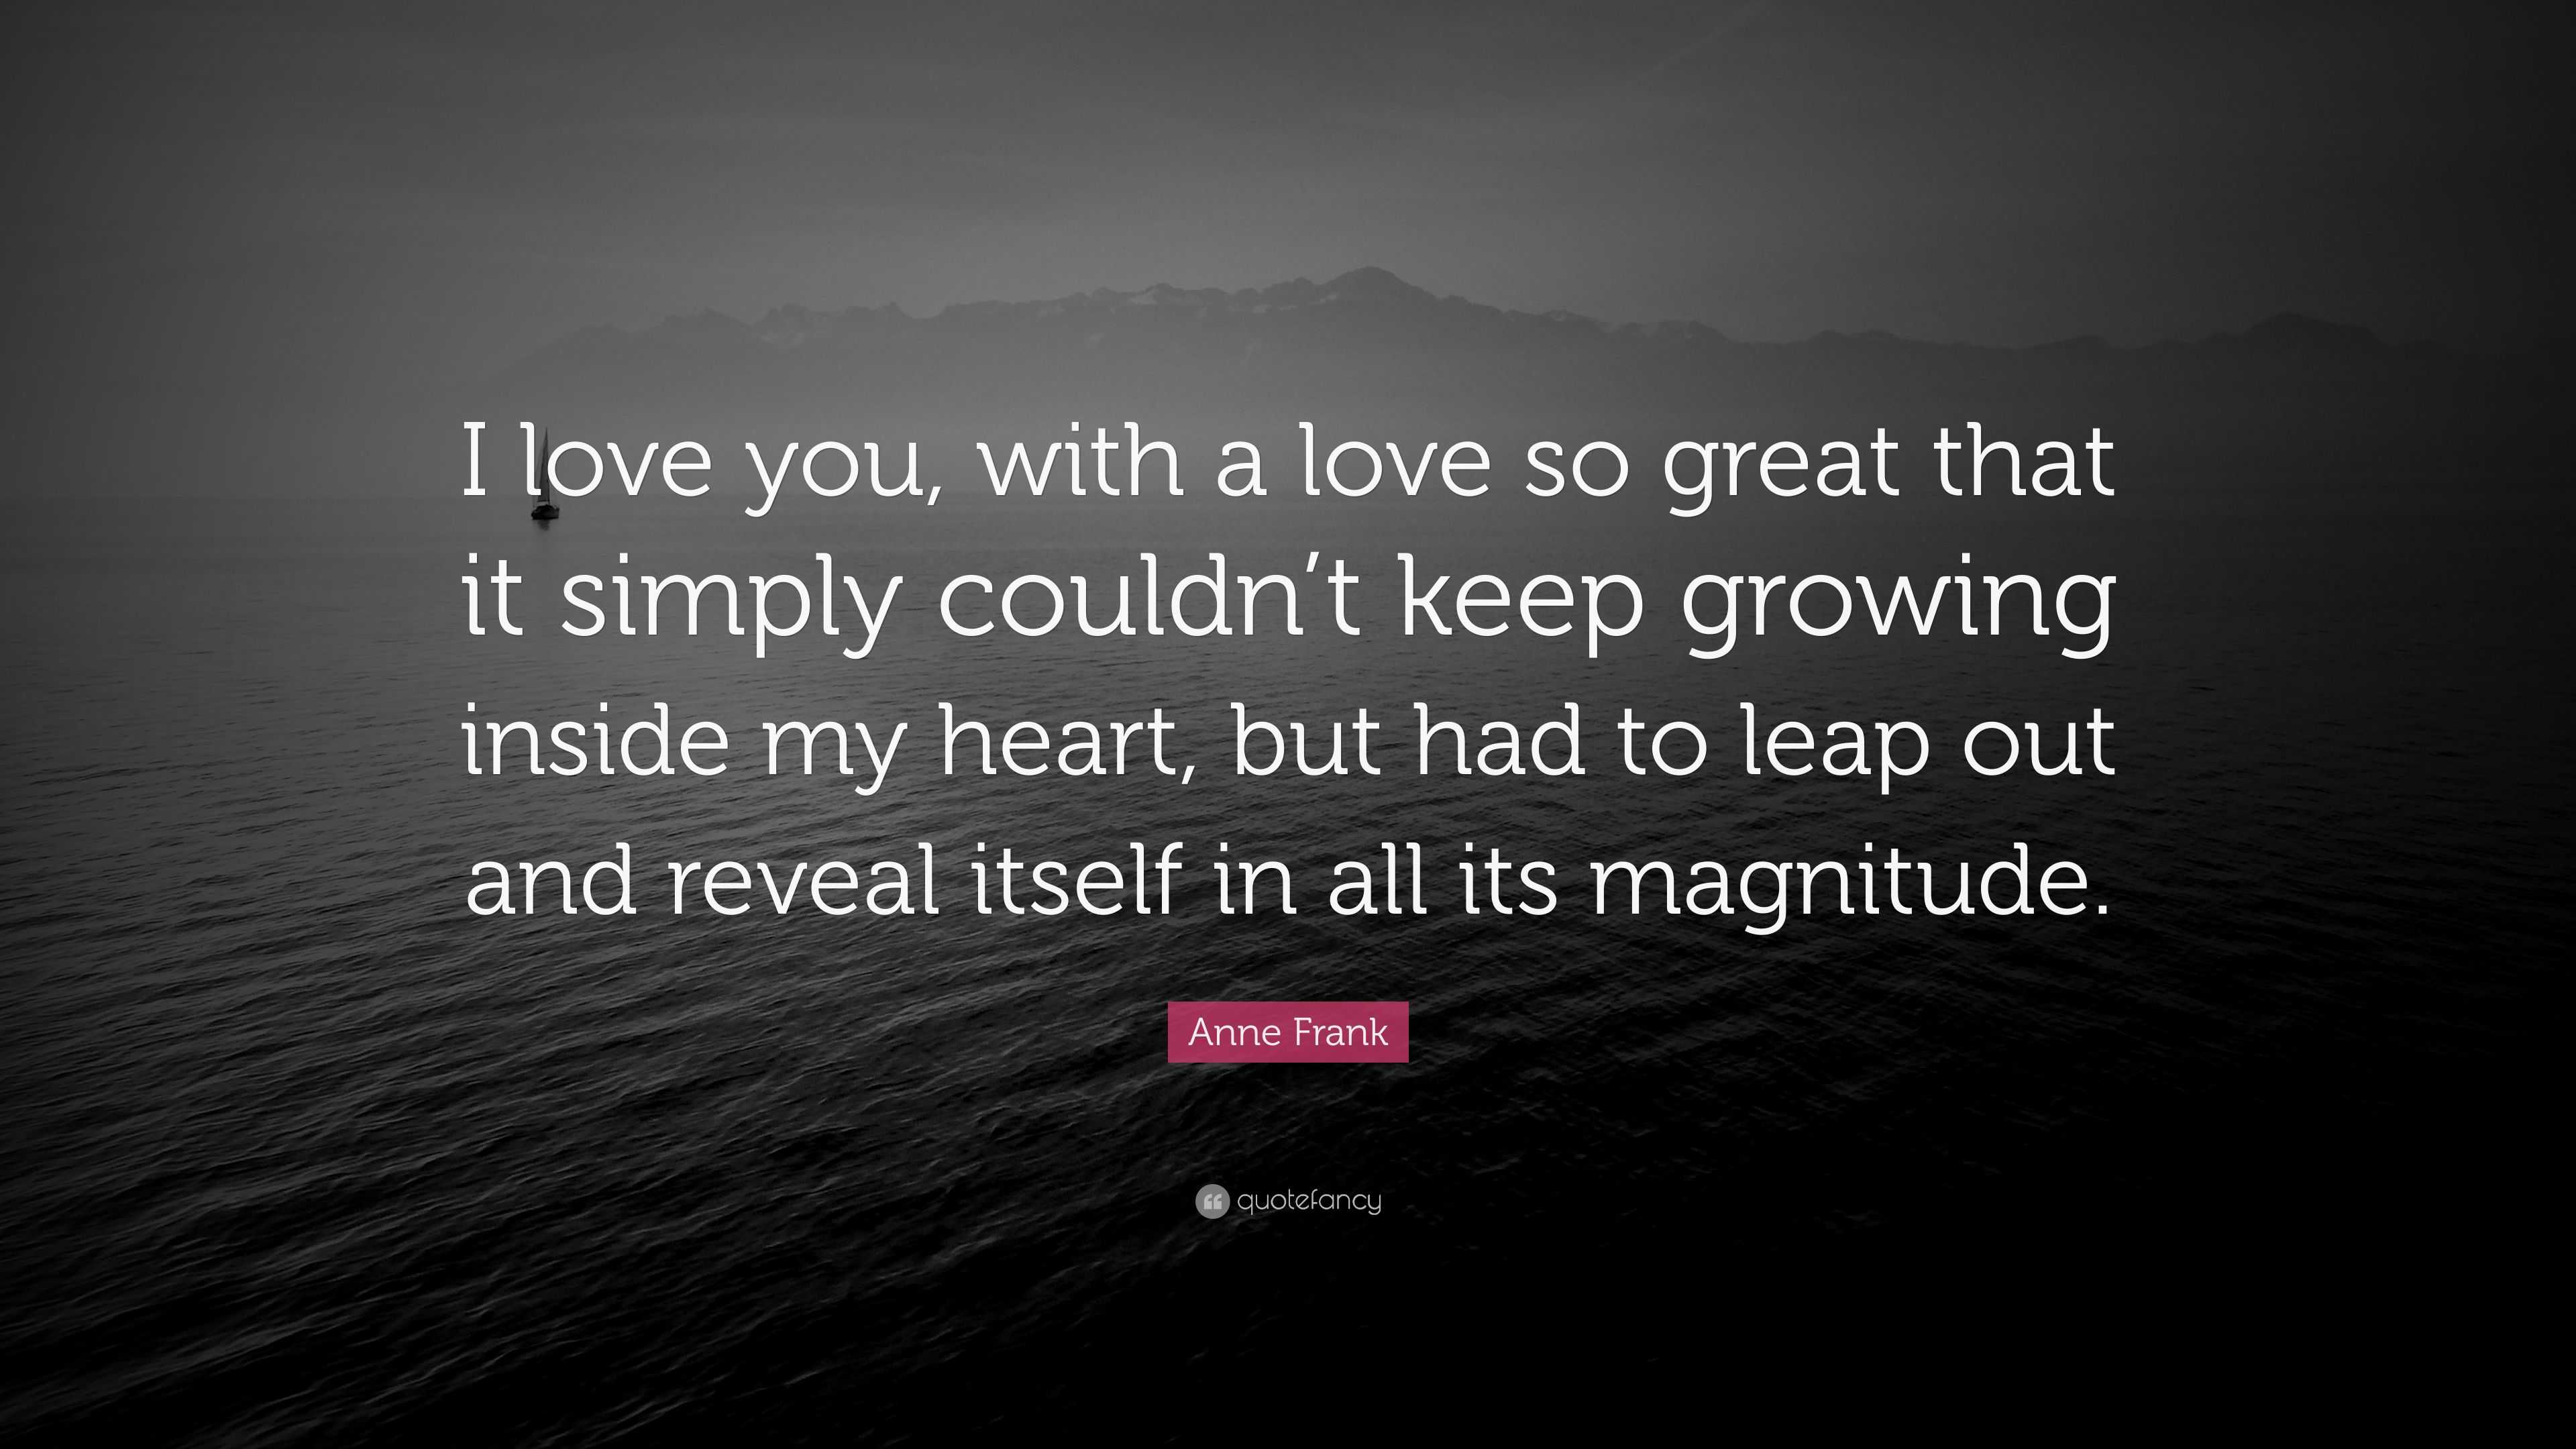 Anne Frank Quote “I love you with a love so great that it